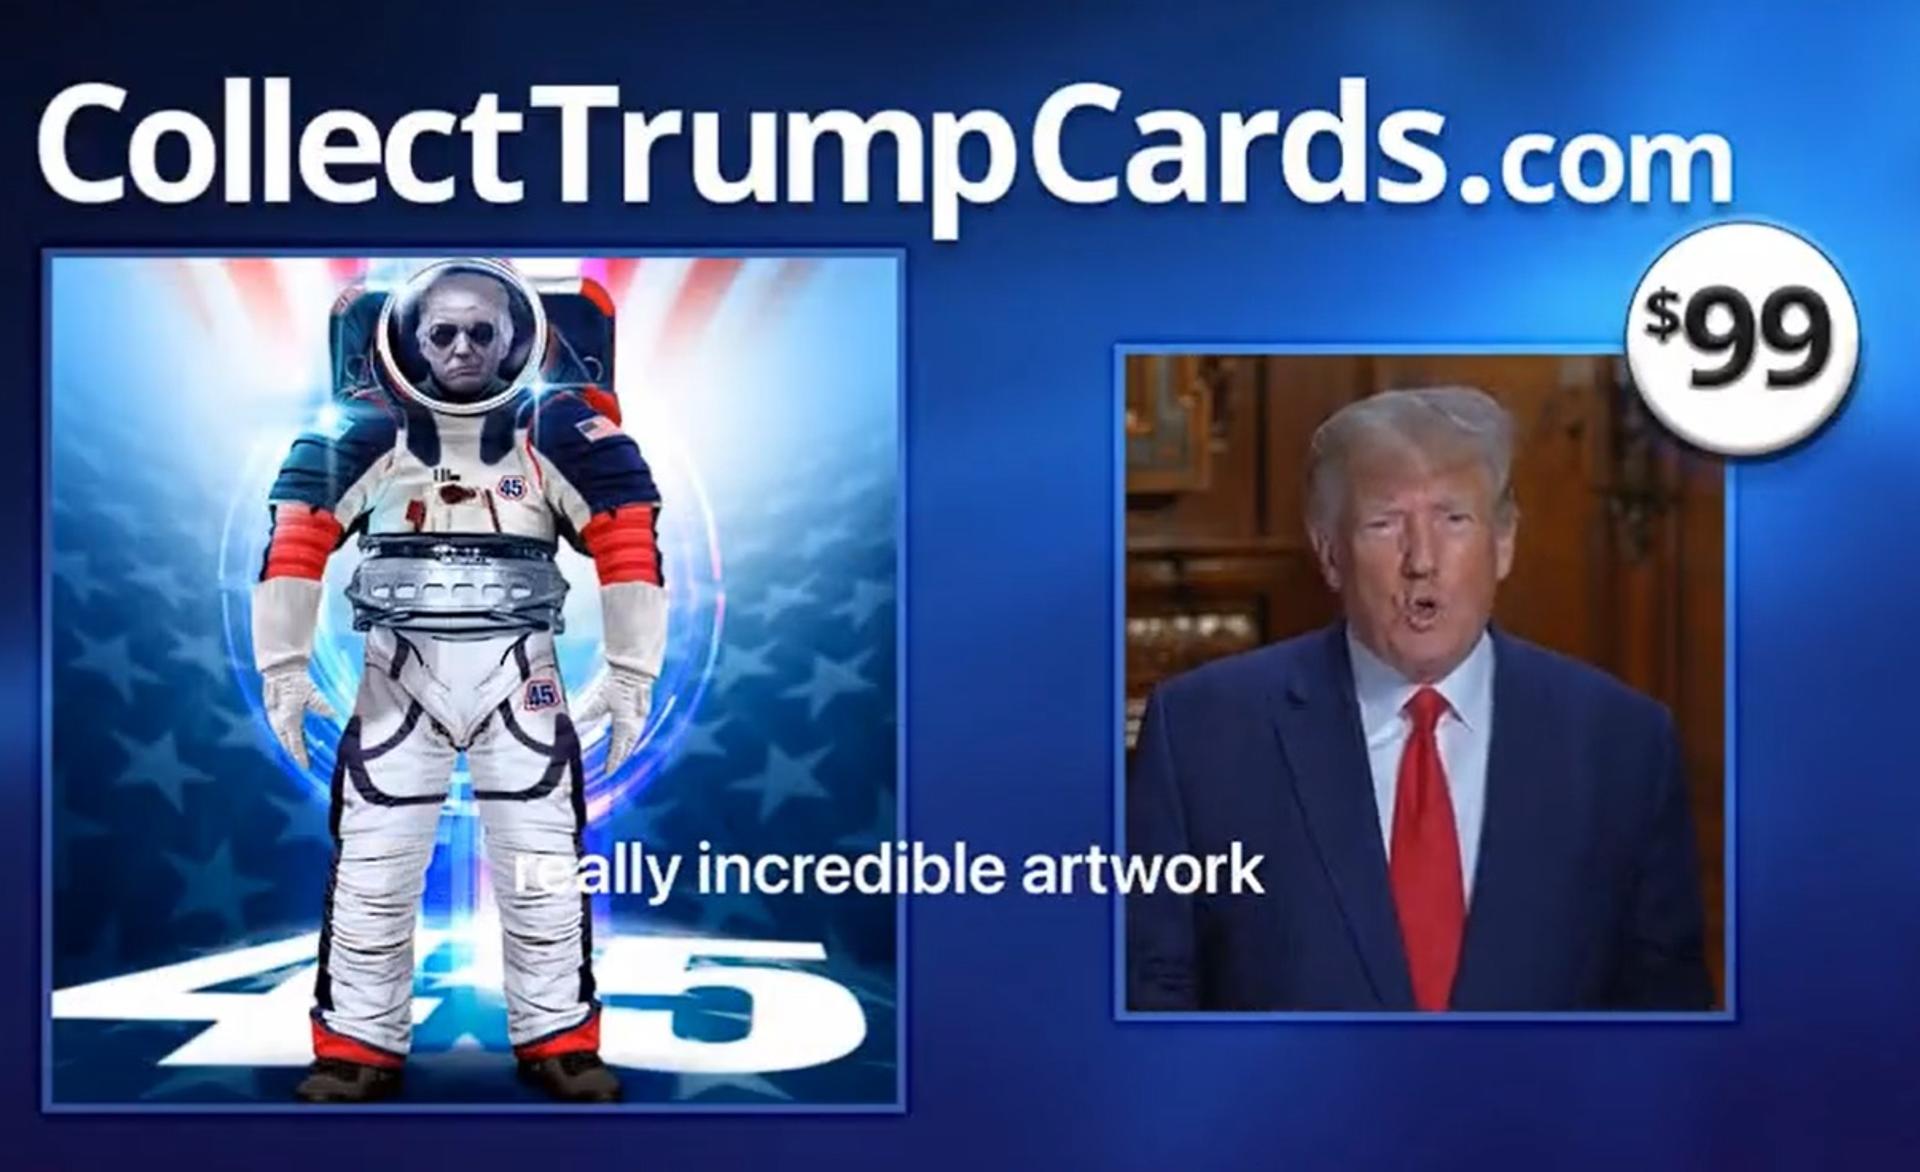 Trump in a video promoting his NFT line.